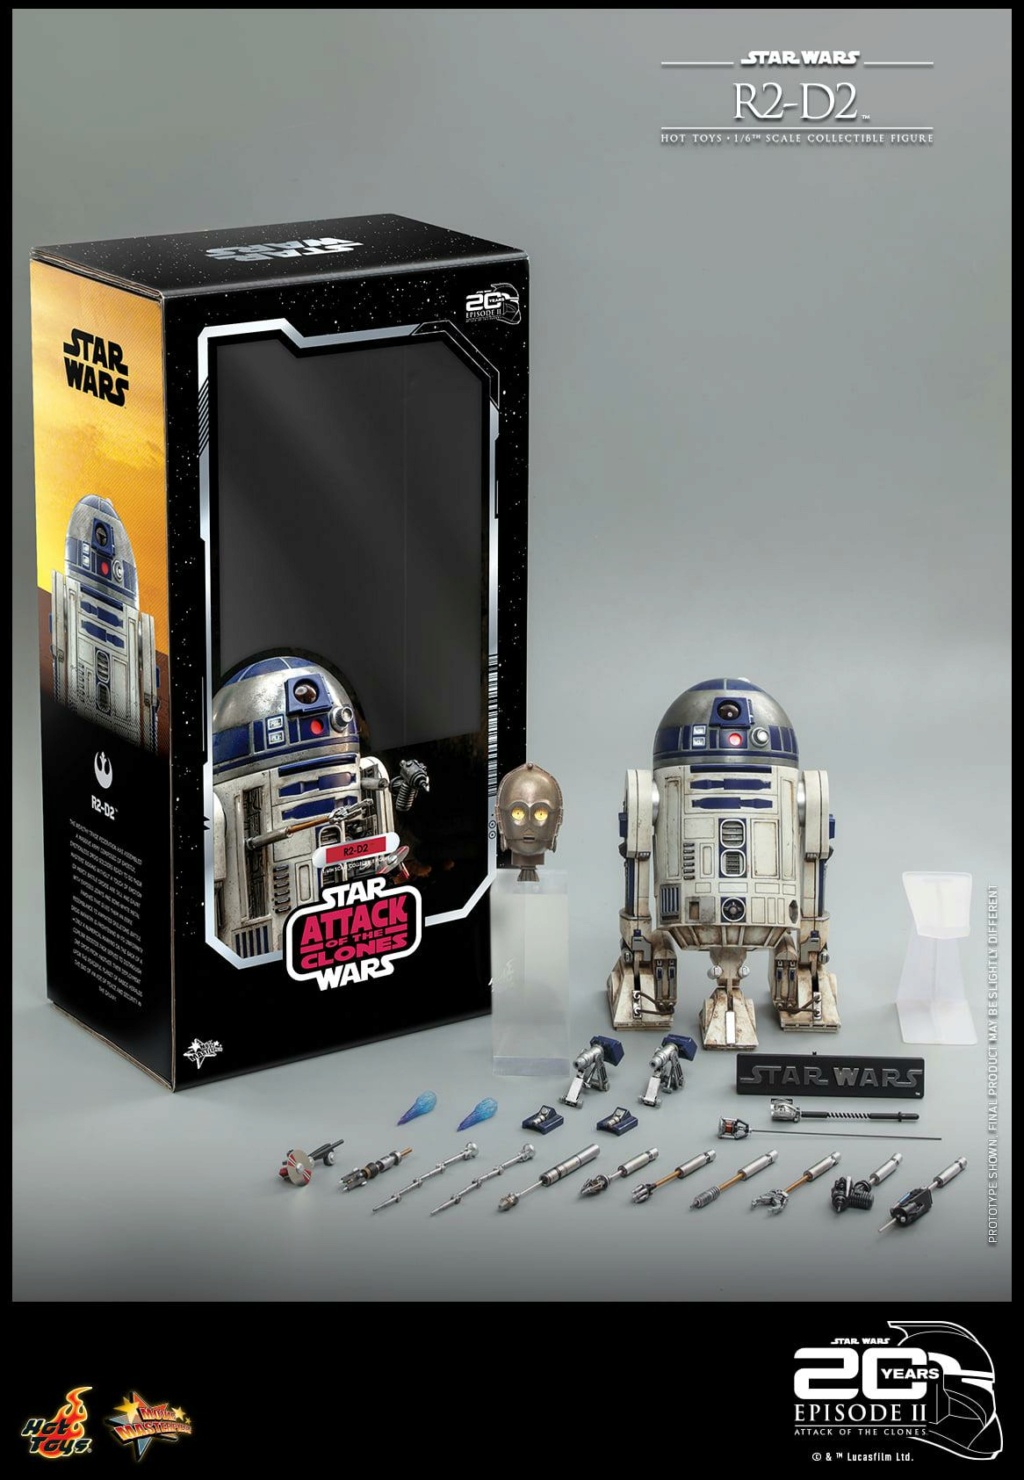 Star Wars Ep. II Attack of the Clones - 1/6th R2-D2 Collectible Hot Toys R2d2_e13